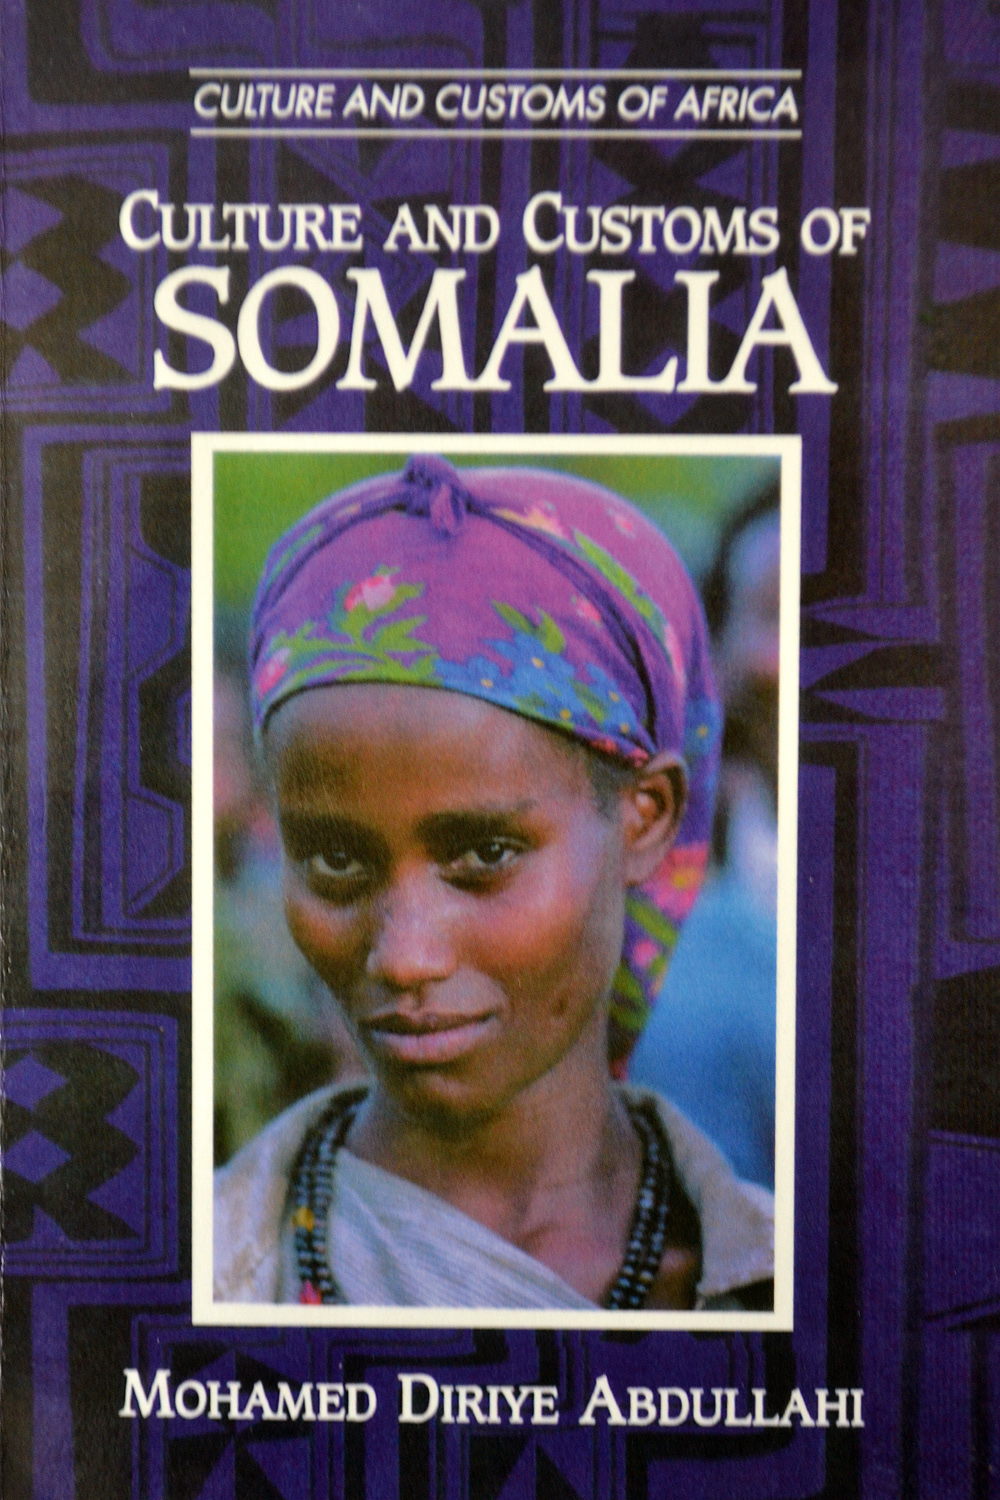 The publication ´Culture and Customs of Somalia´.